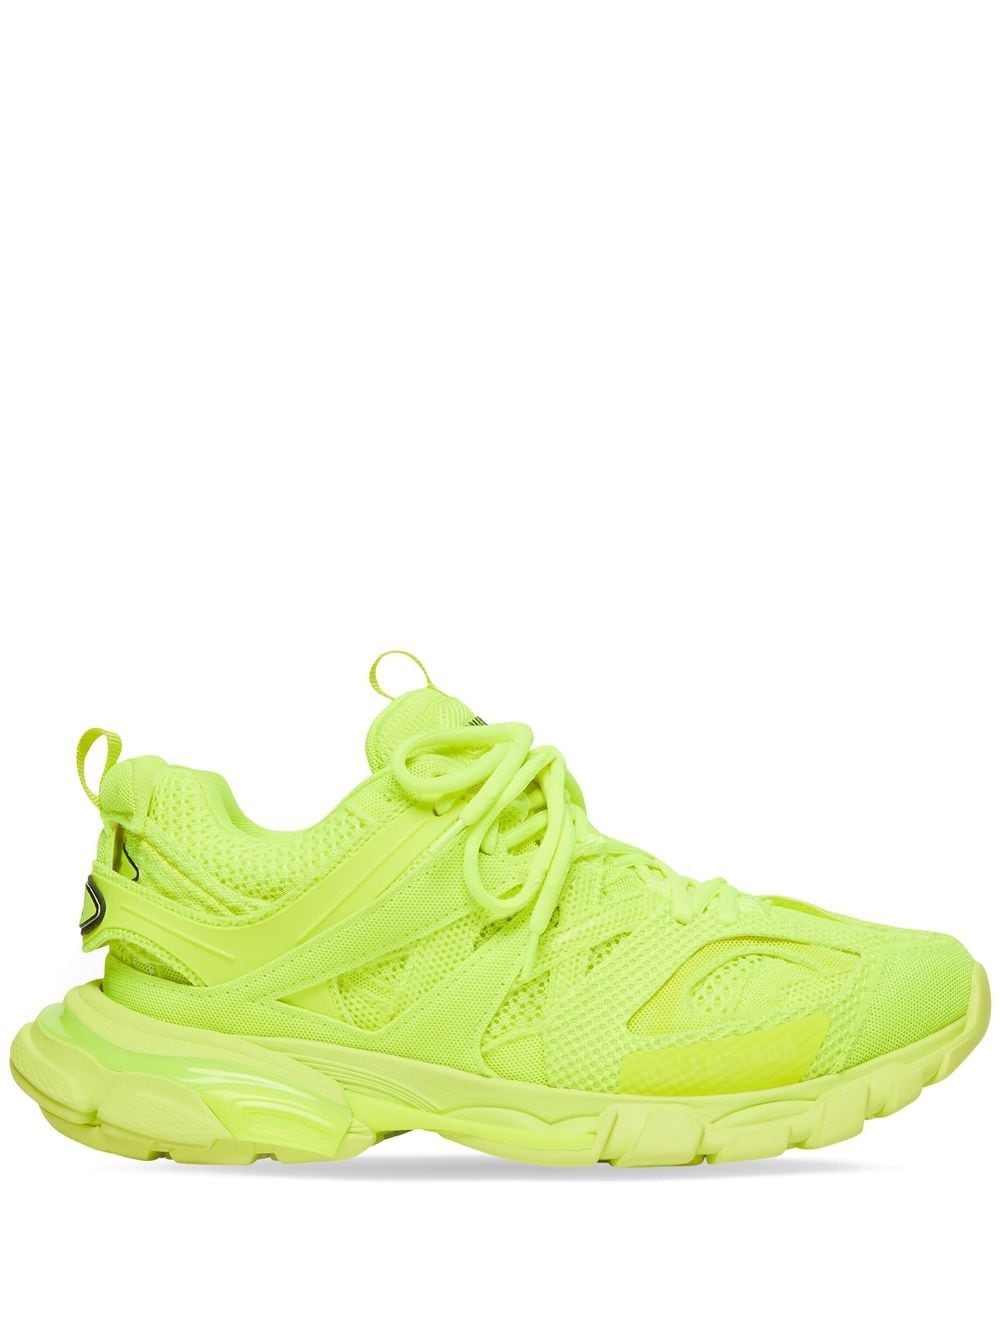 Balenciaga Track lace-up sneakers - Yellow